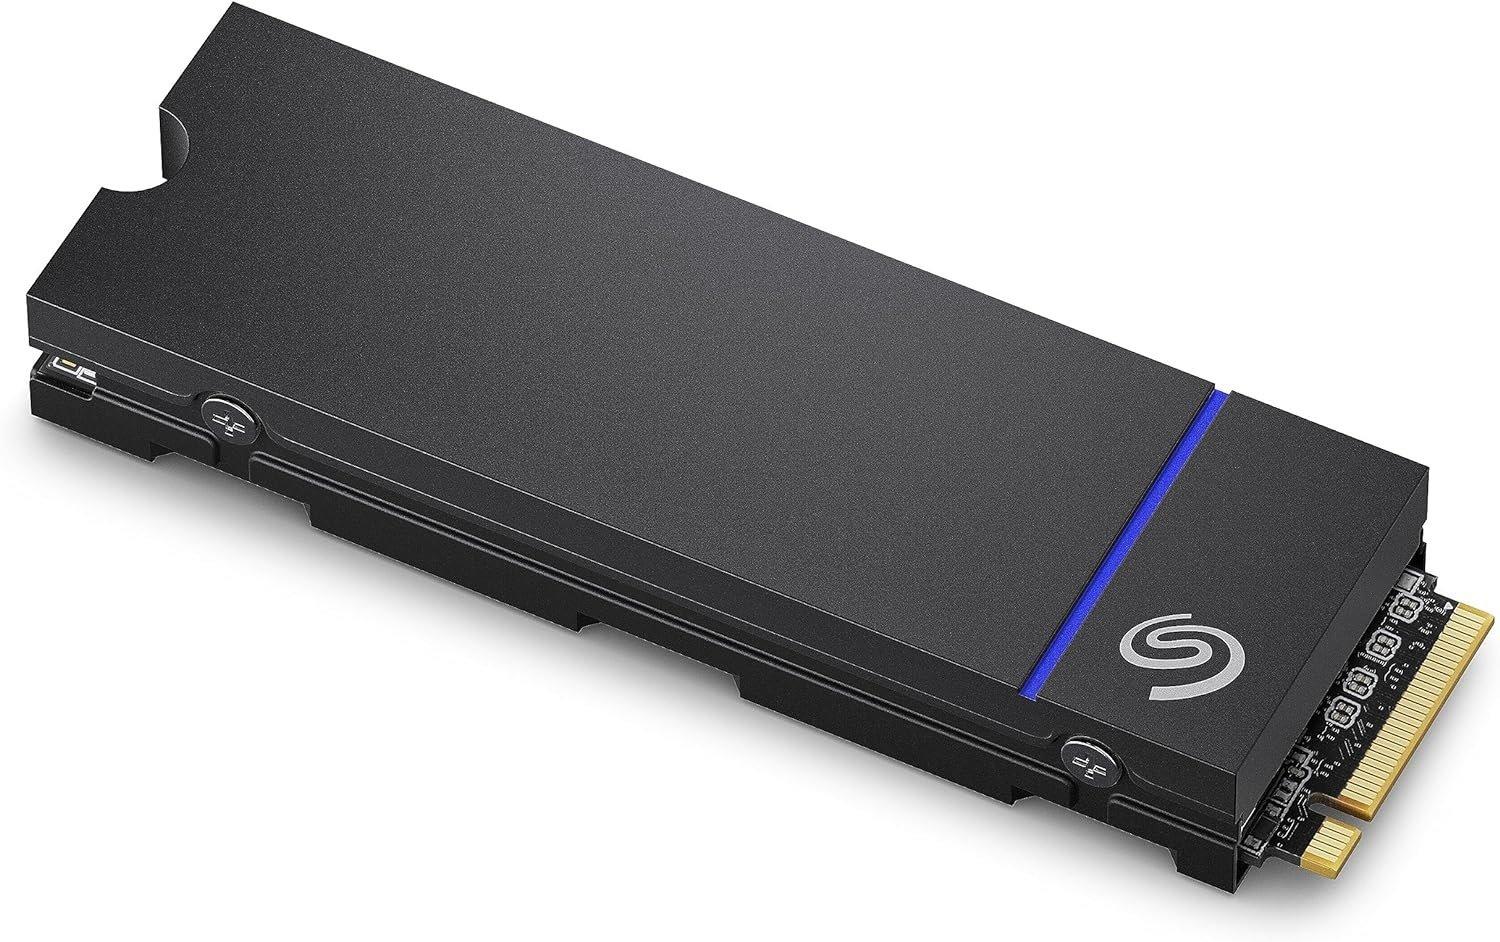 Seagate Game Drive NVMe Internal SSD PCIe Gen 4 x4 with Heatsink for PlayStation 5 2TB